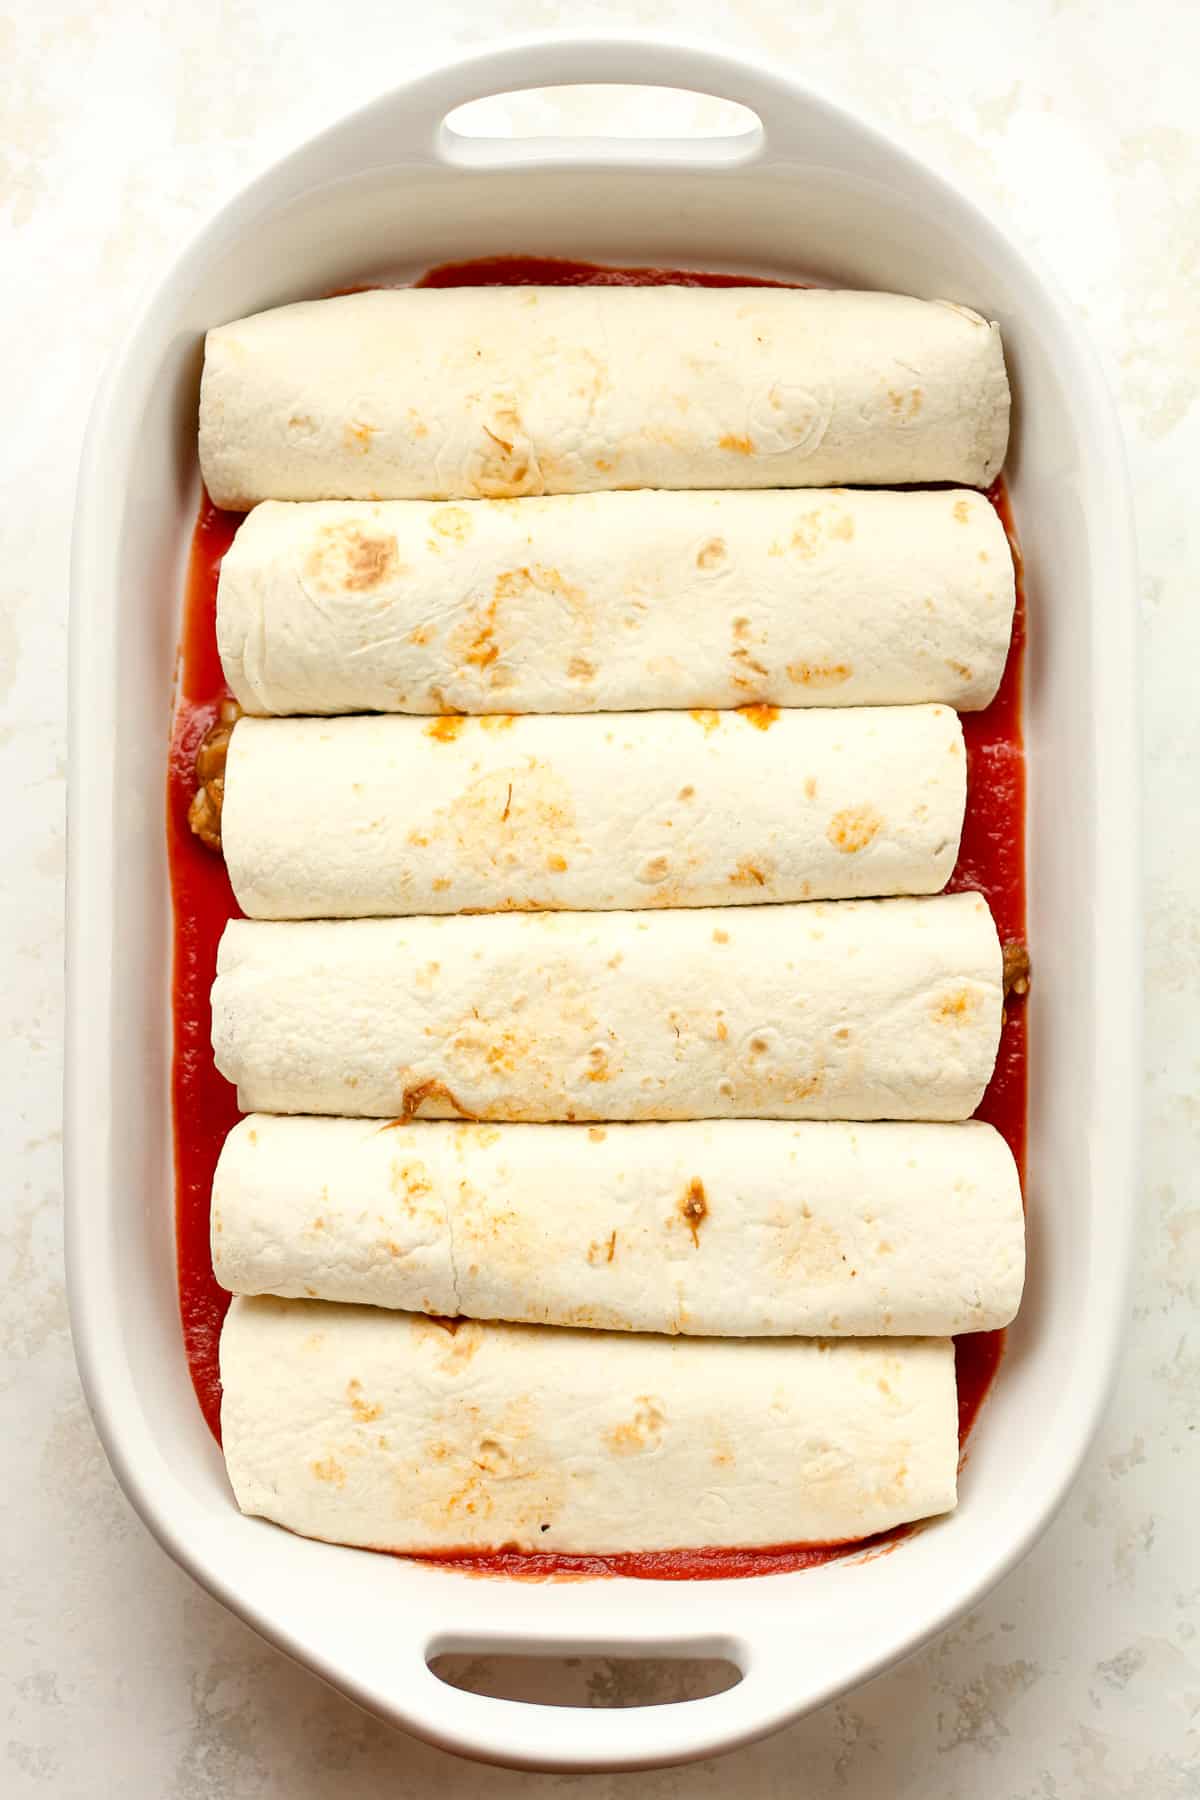 A casserole of the beef enchiladas before adding the sauce and cheese on top.